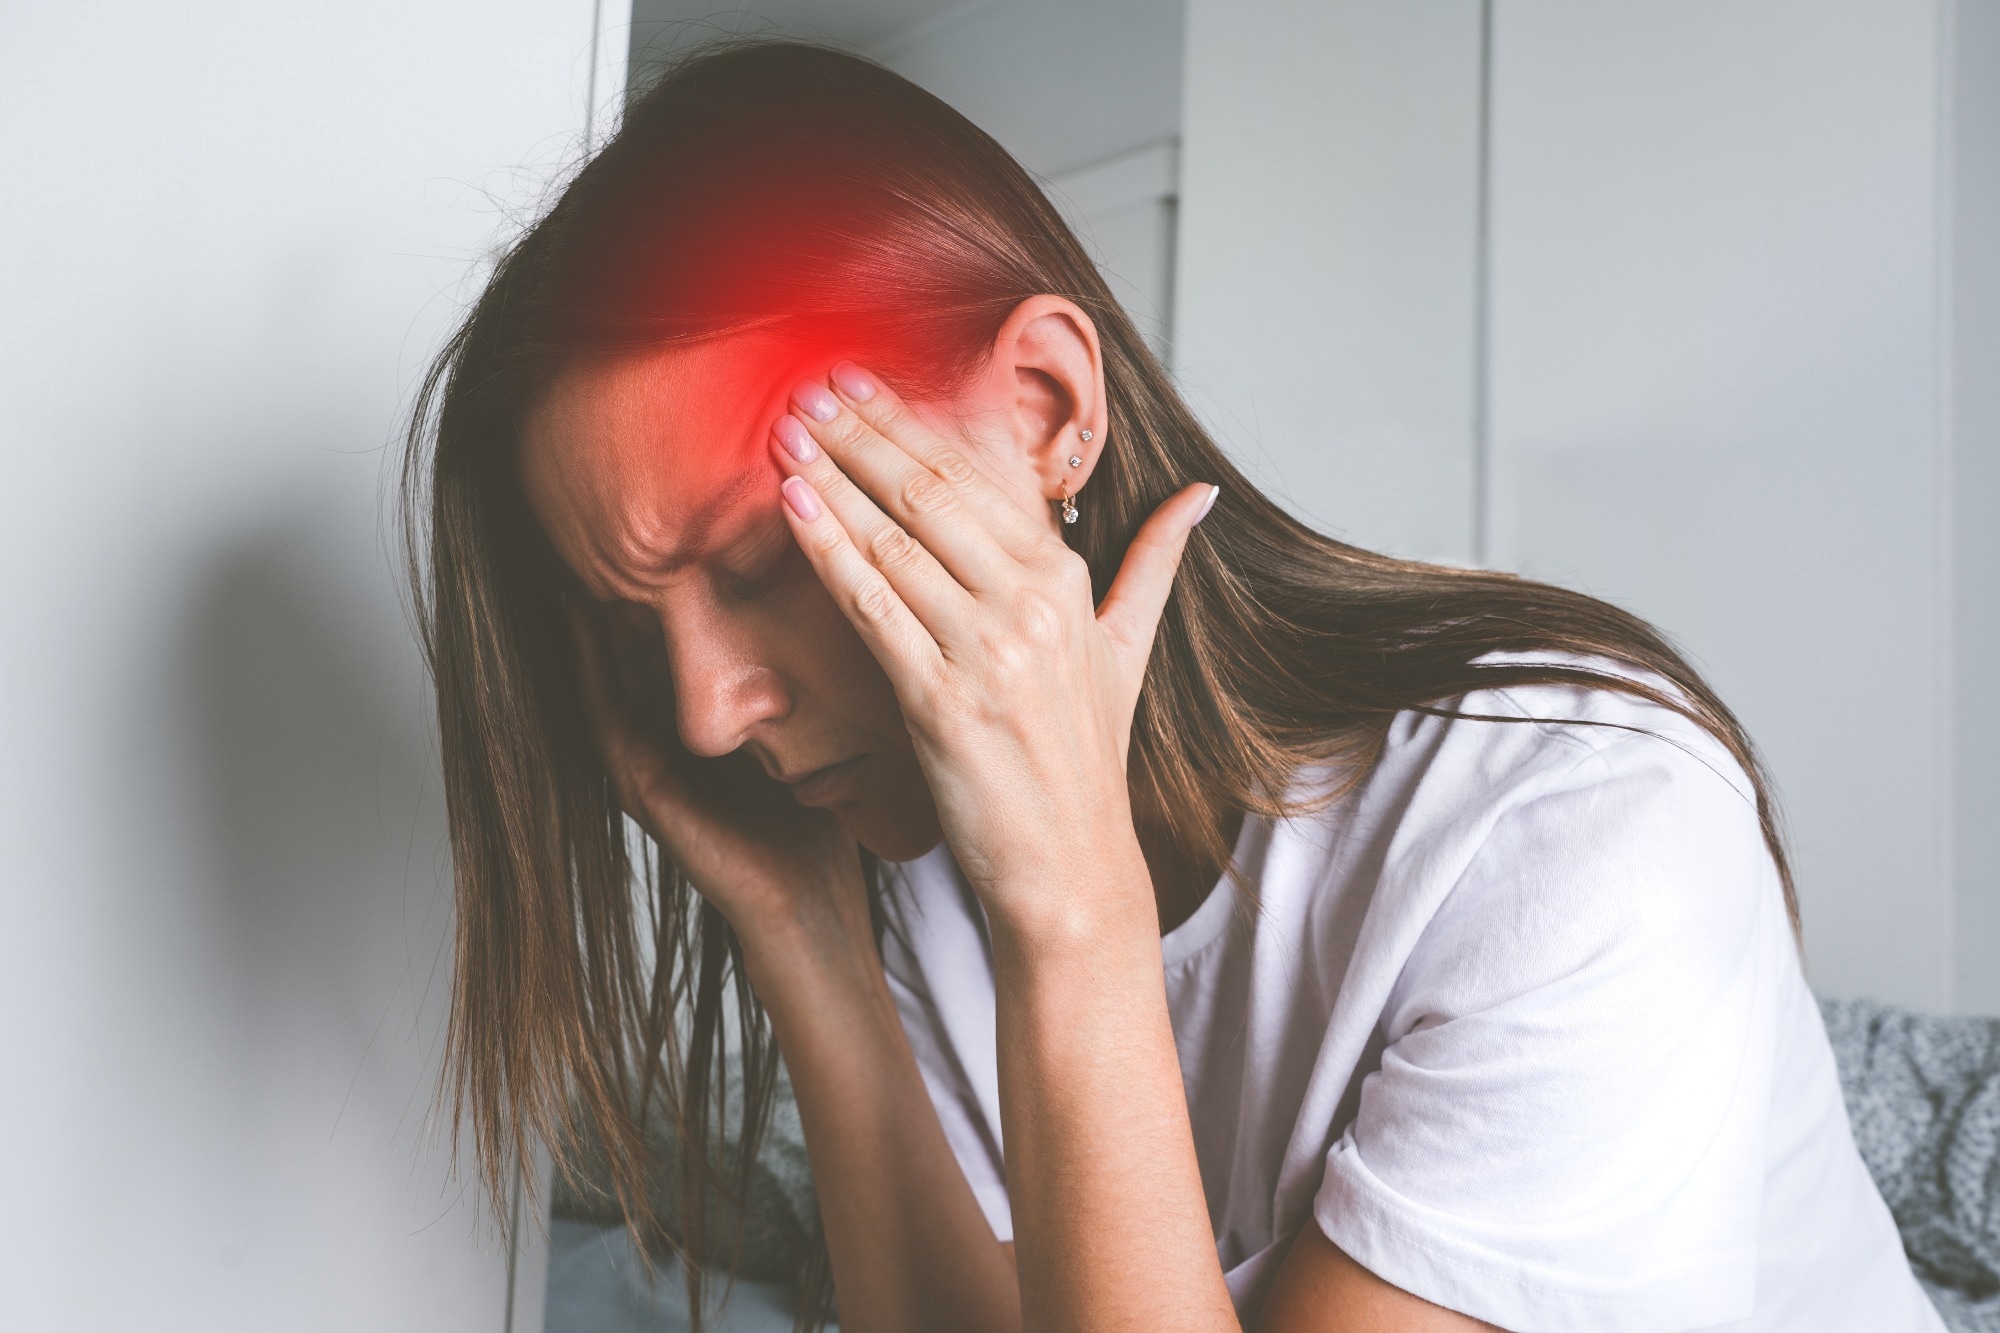 Study: Neuropsychological deficits in patients with persistent COVID-19 symptoms: a systematic review and meta-analysis. Image Credit: Creative Cat Studio / Shutterstock.com